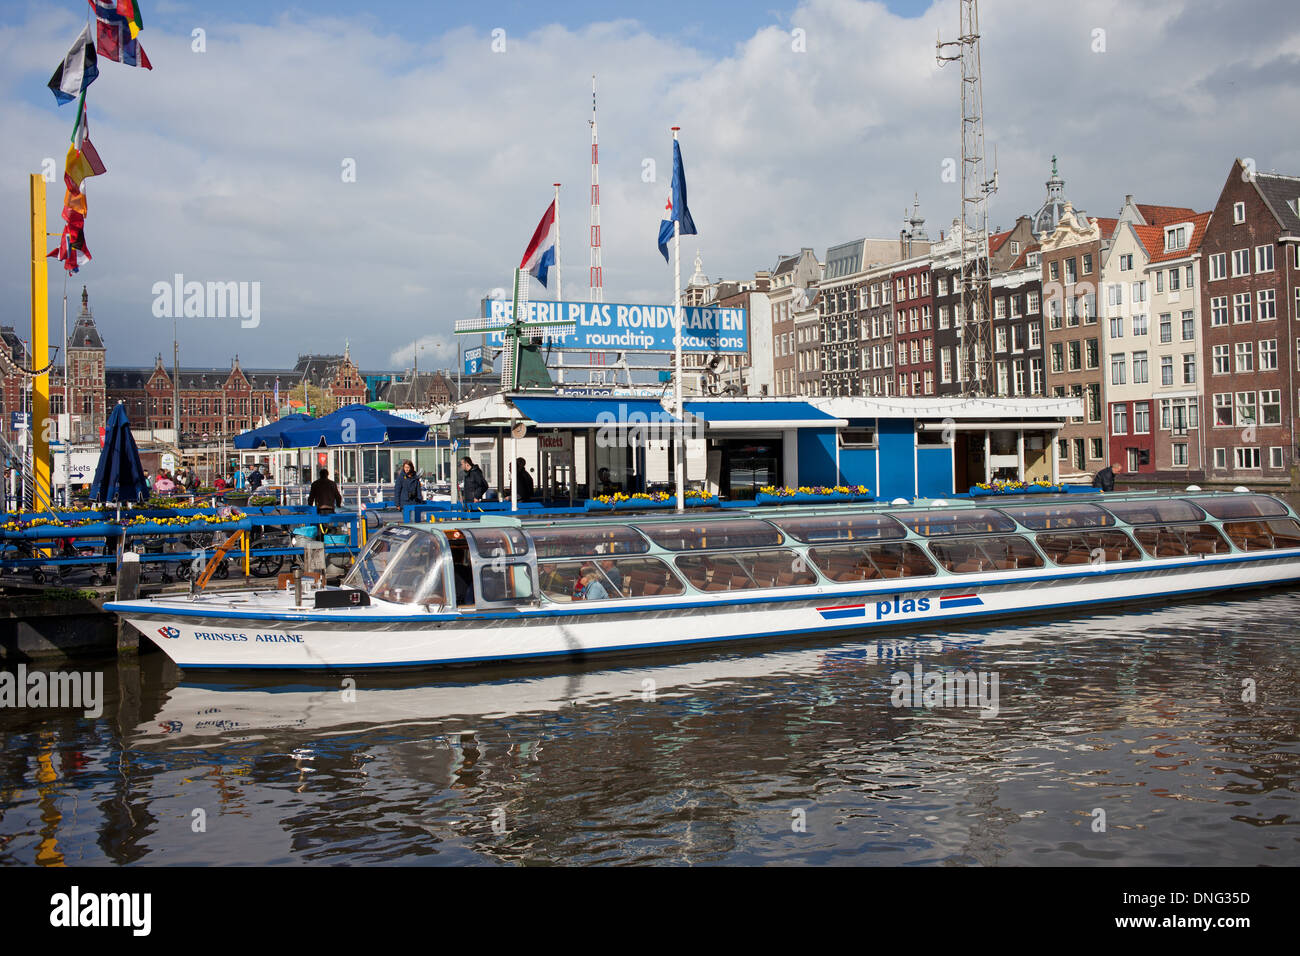 Rederij Plas passenger boat ready for tours and cruises, docked at pier on a canal in Amsterdam, Holland, the Netherlands. Stock Photo